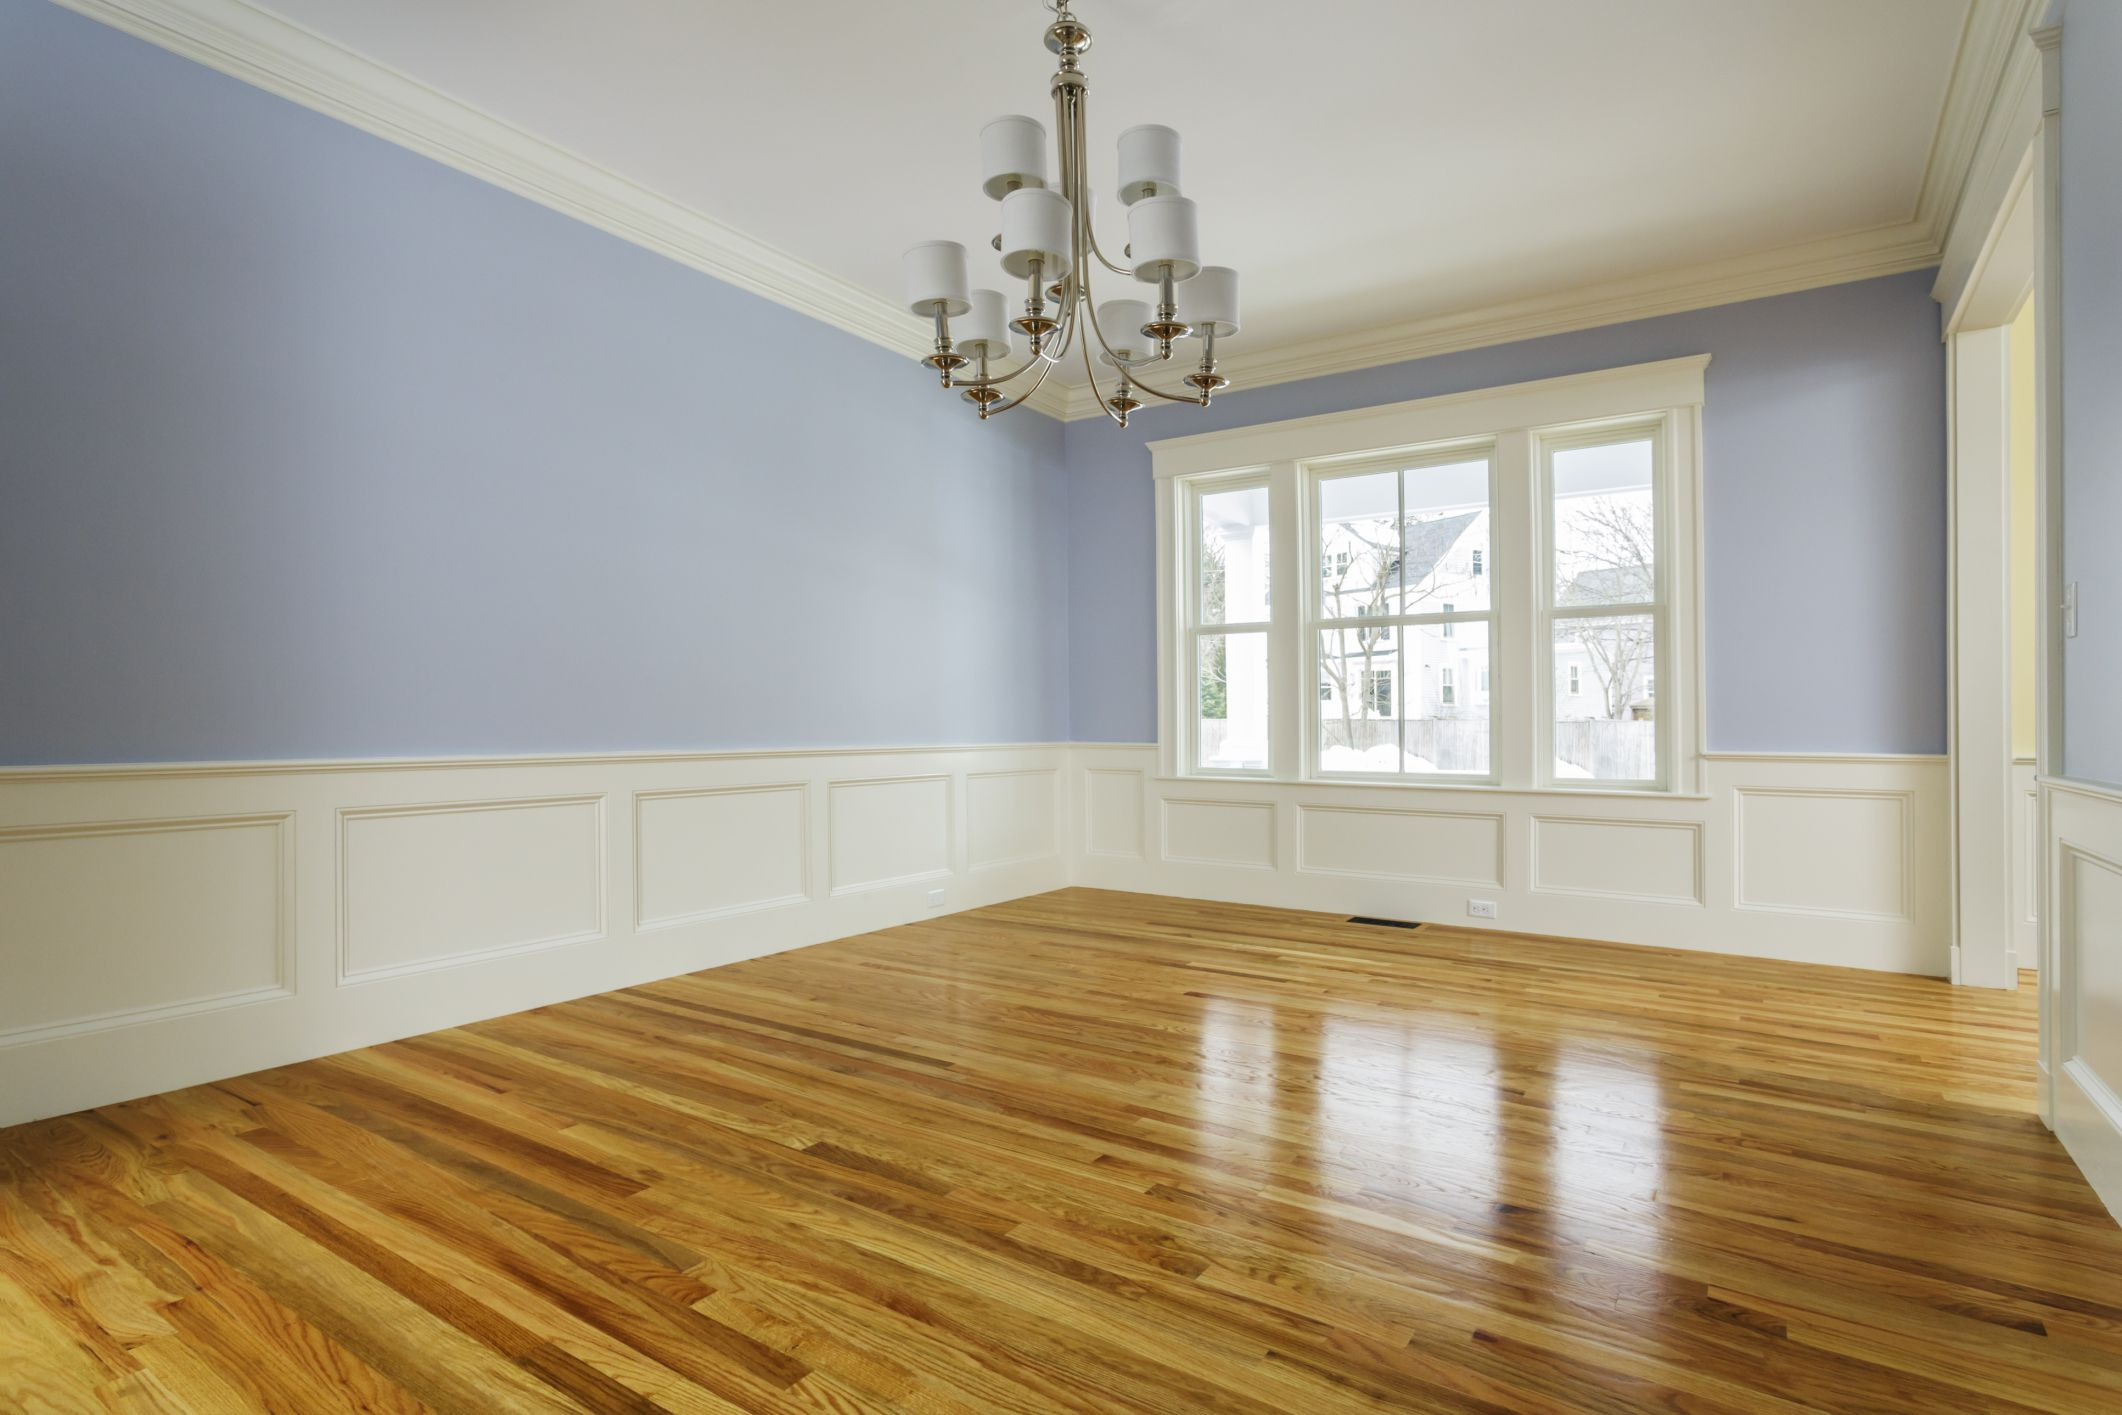 29 attractive How to Refinish Hardwood Floors Yourself 2024 free download how to refinish hardwood floors yourself of the cost to refinish hardwood floors with regard to 168686572 highres 56a2fd773df78cf7727b6cb3